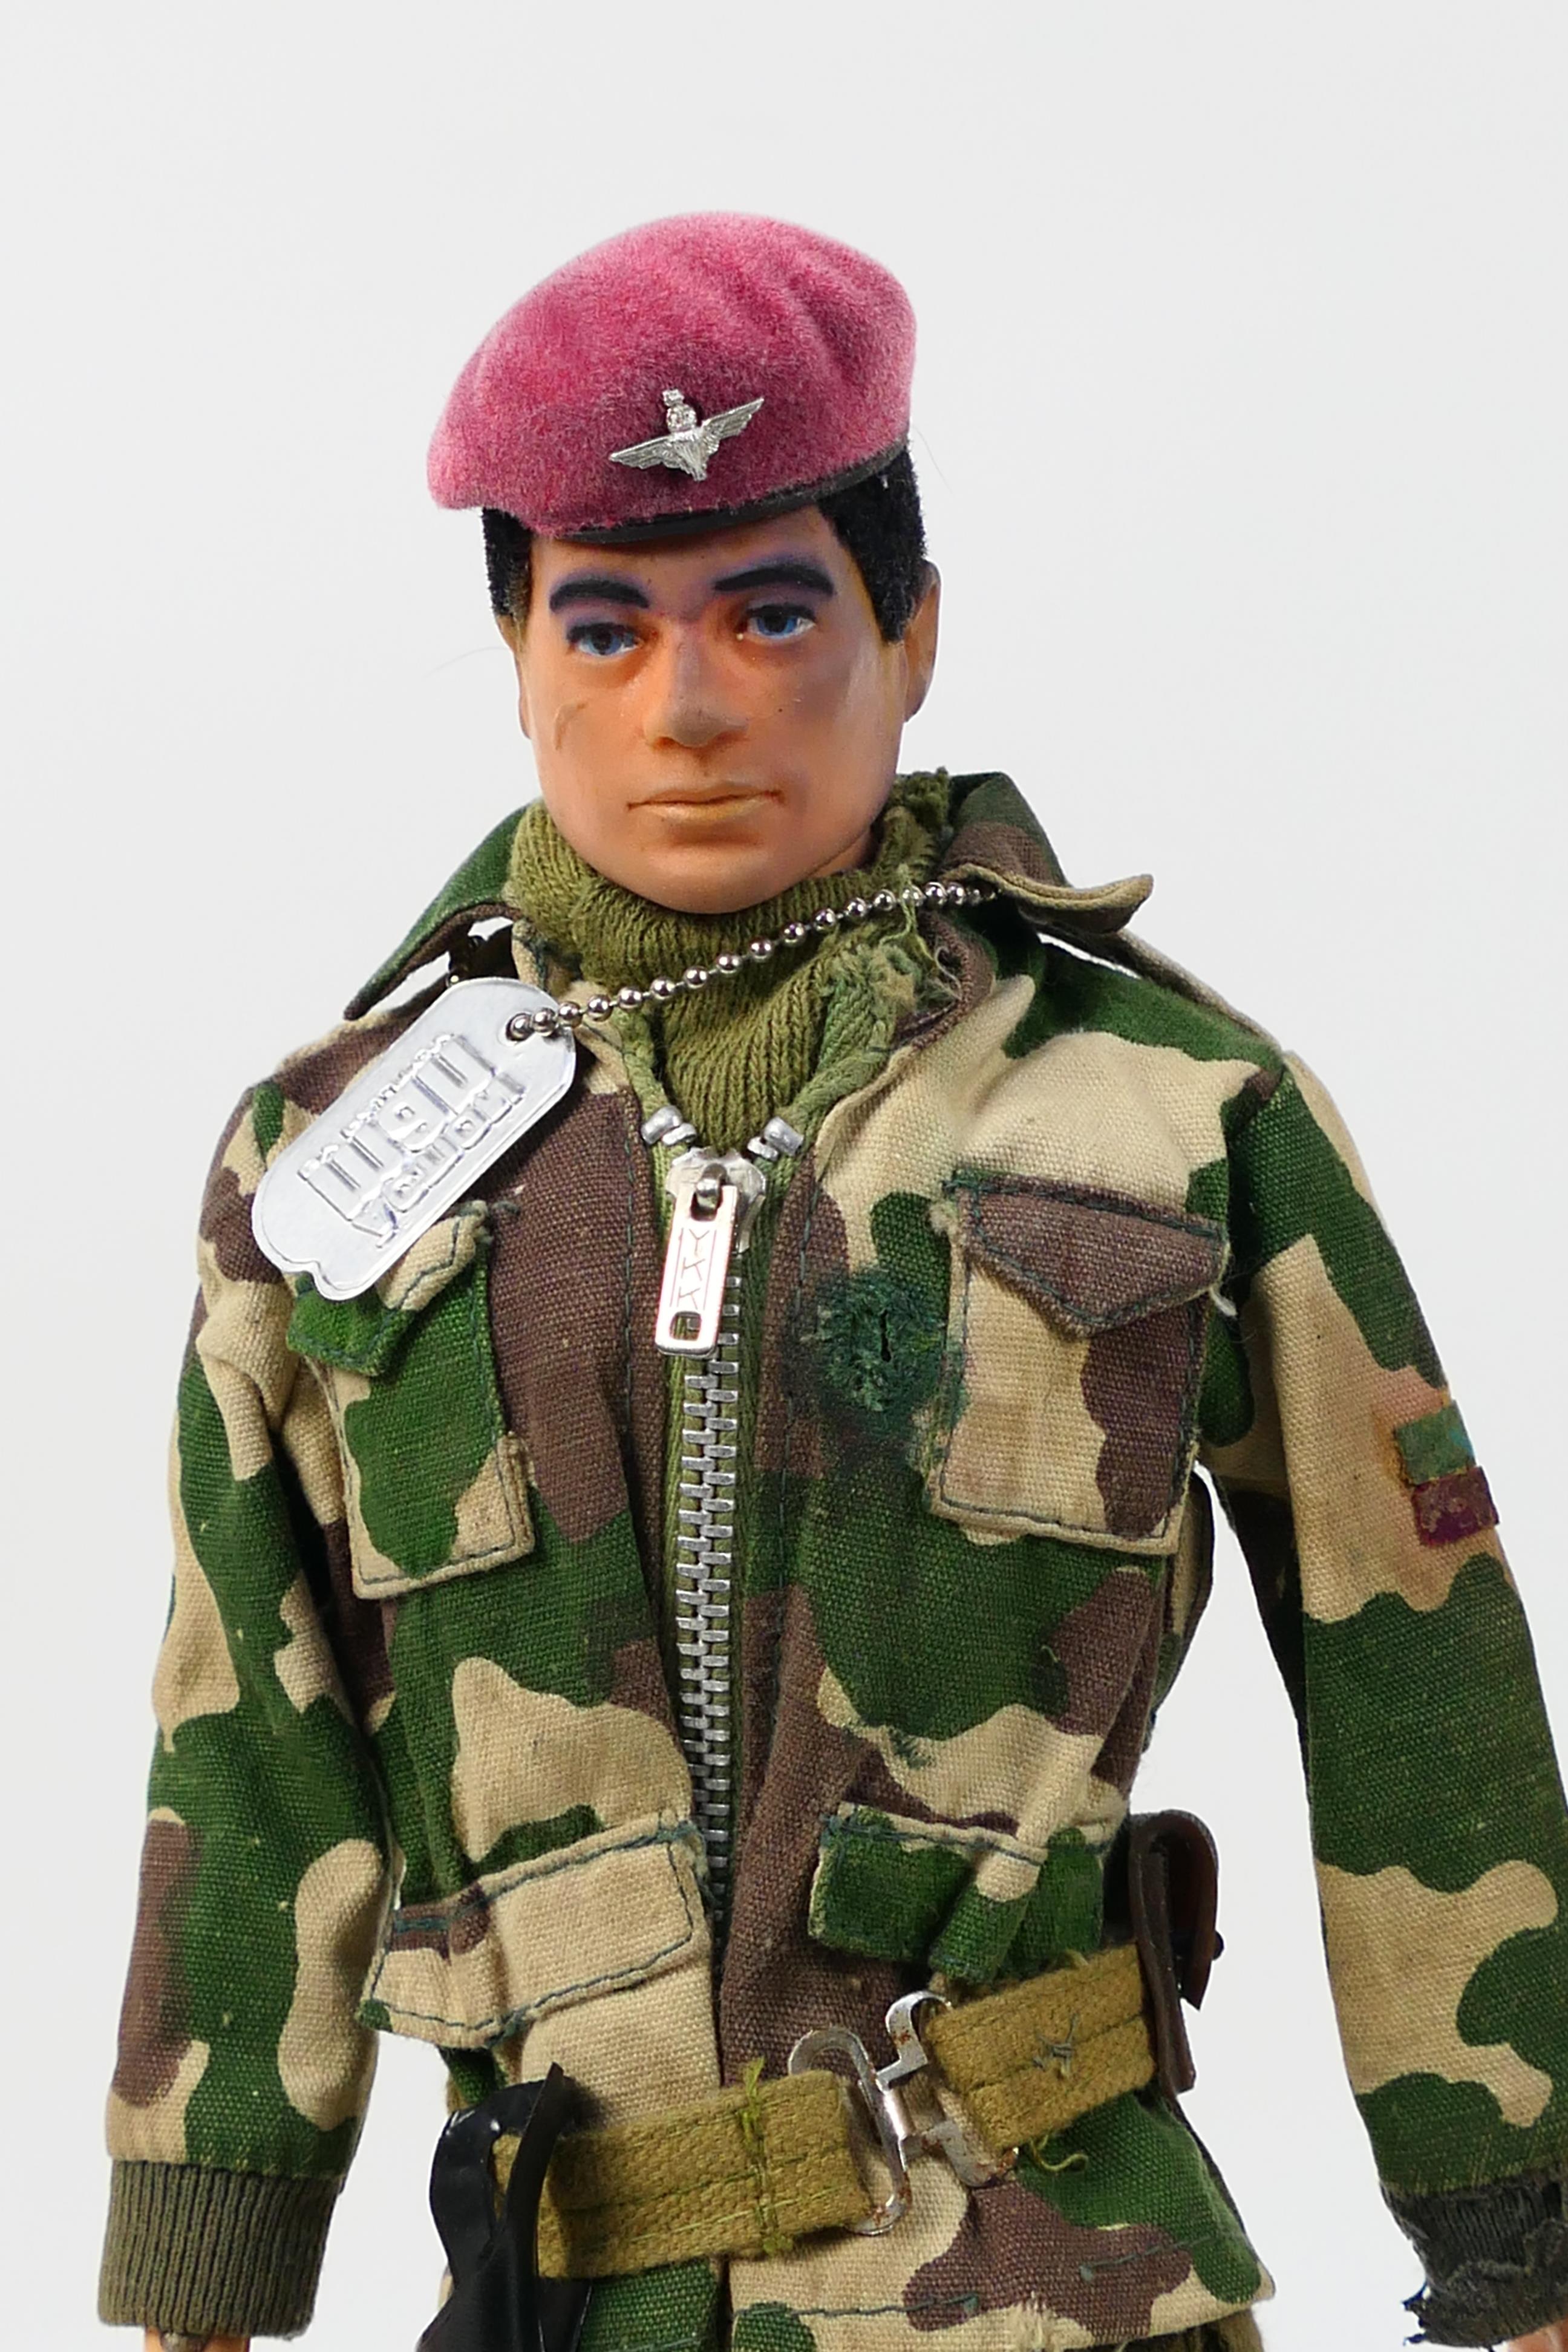 Palitoy - Action Man - Two unboxed vintage Action Man figures in Tank Commander and Parachute - Image 3 of 8